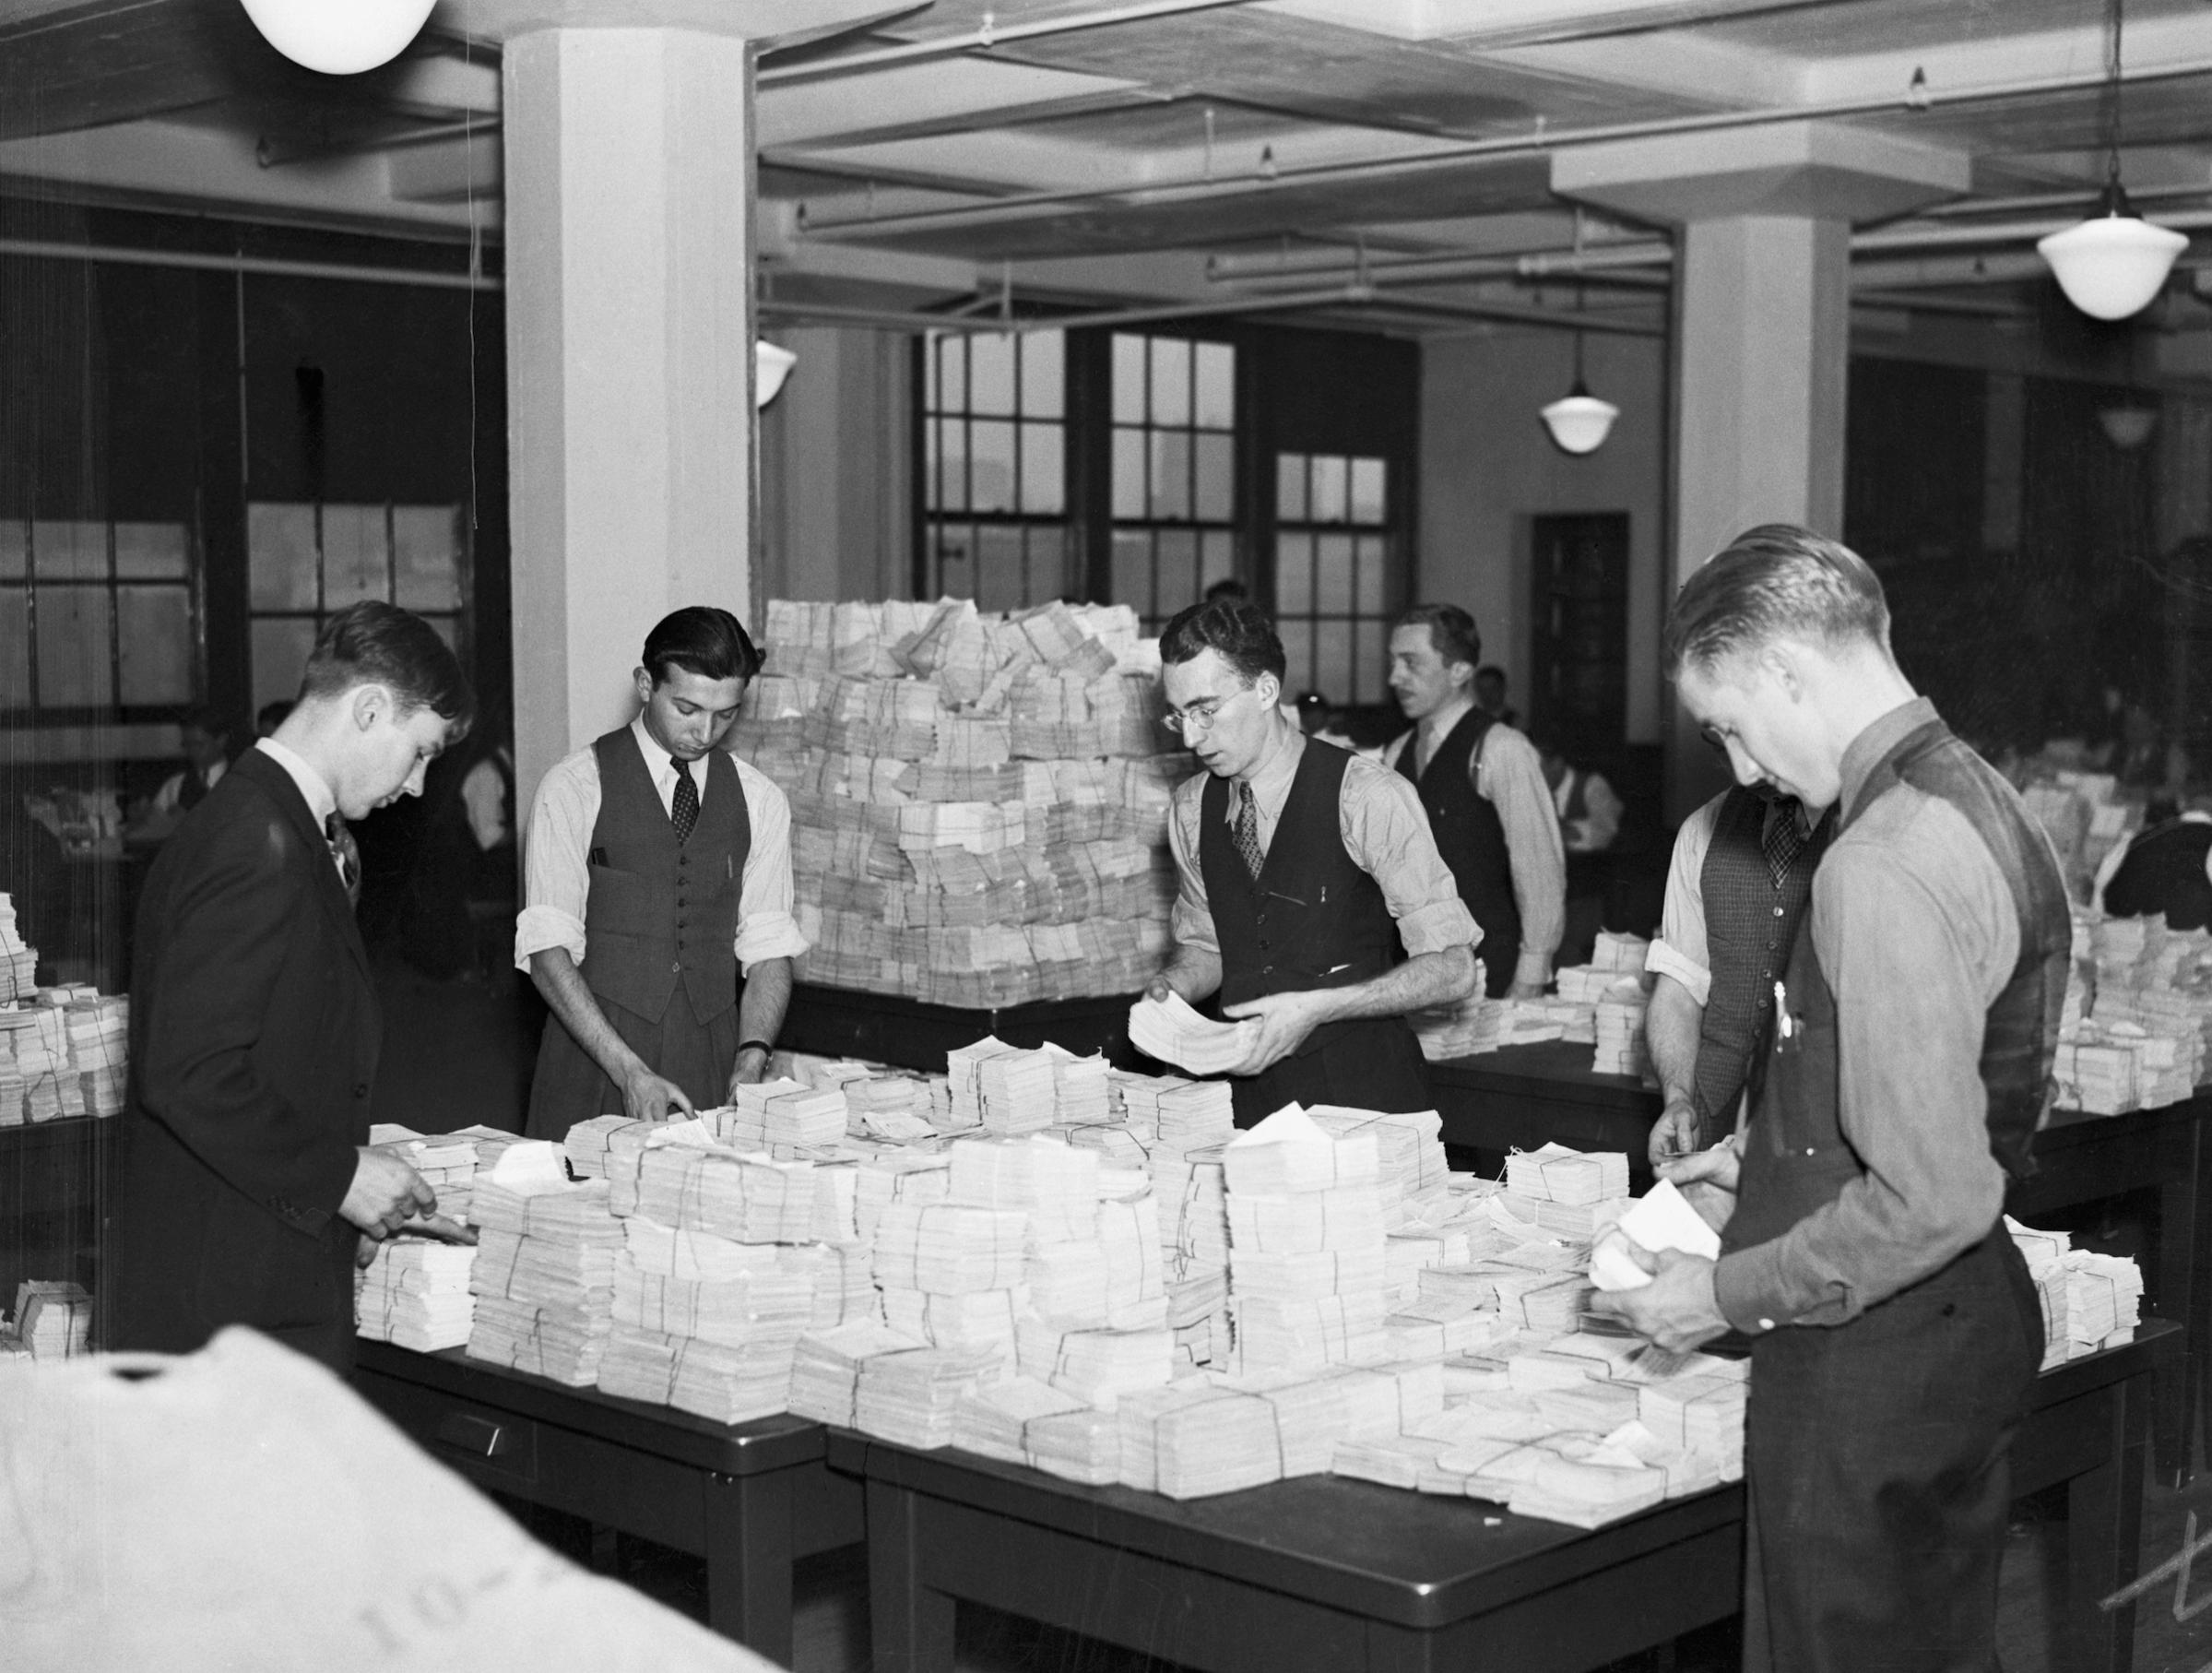 Clerical Workers Sorting Social Security Cards